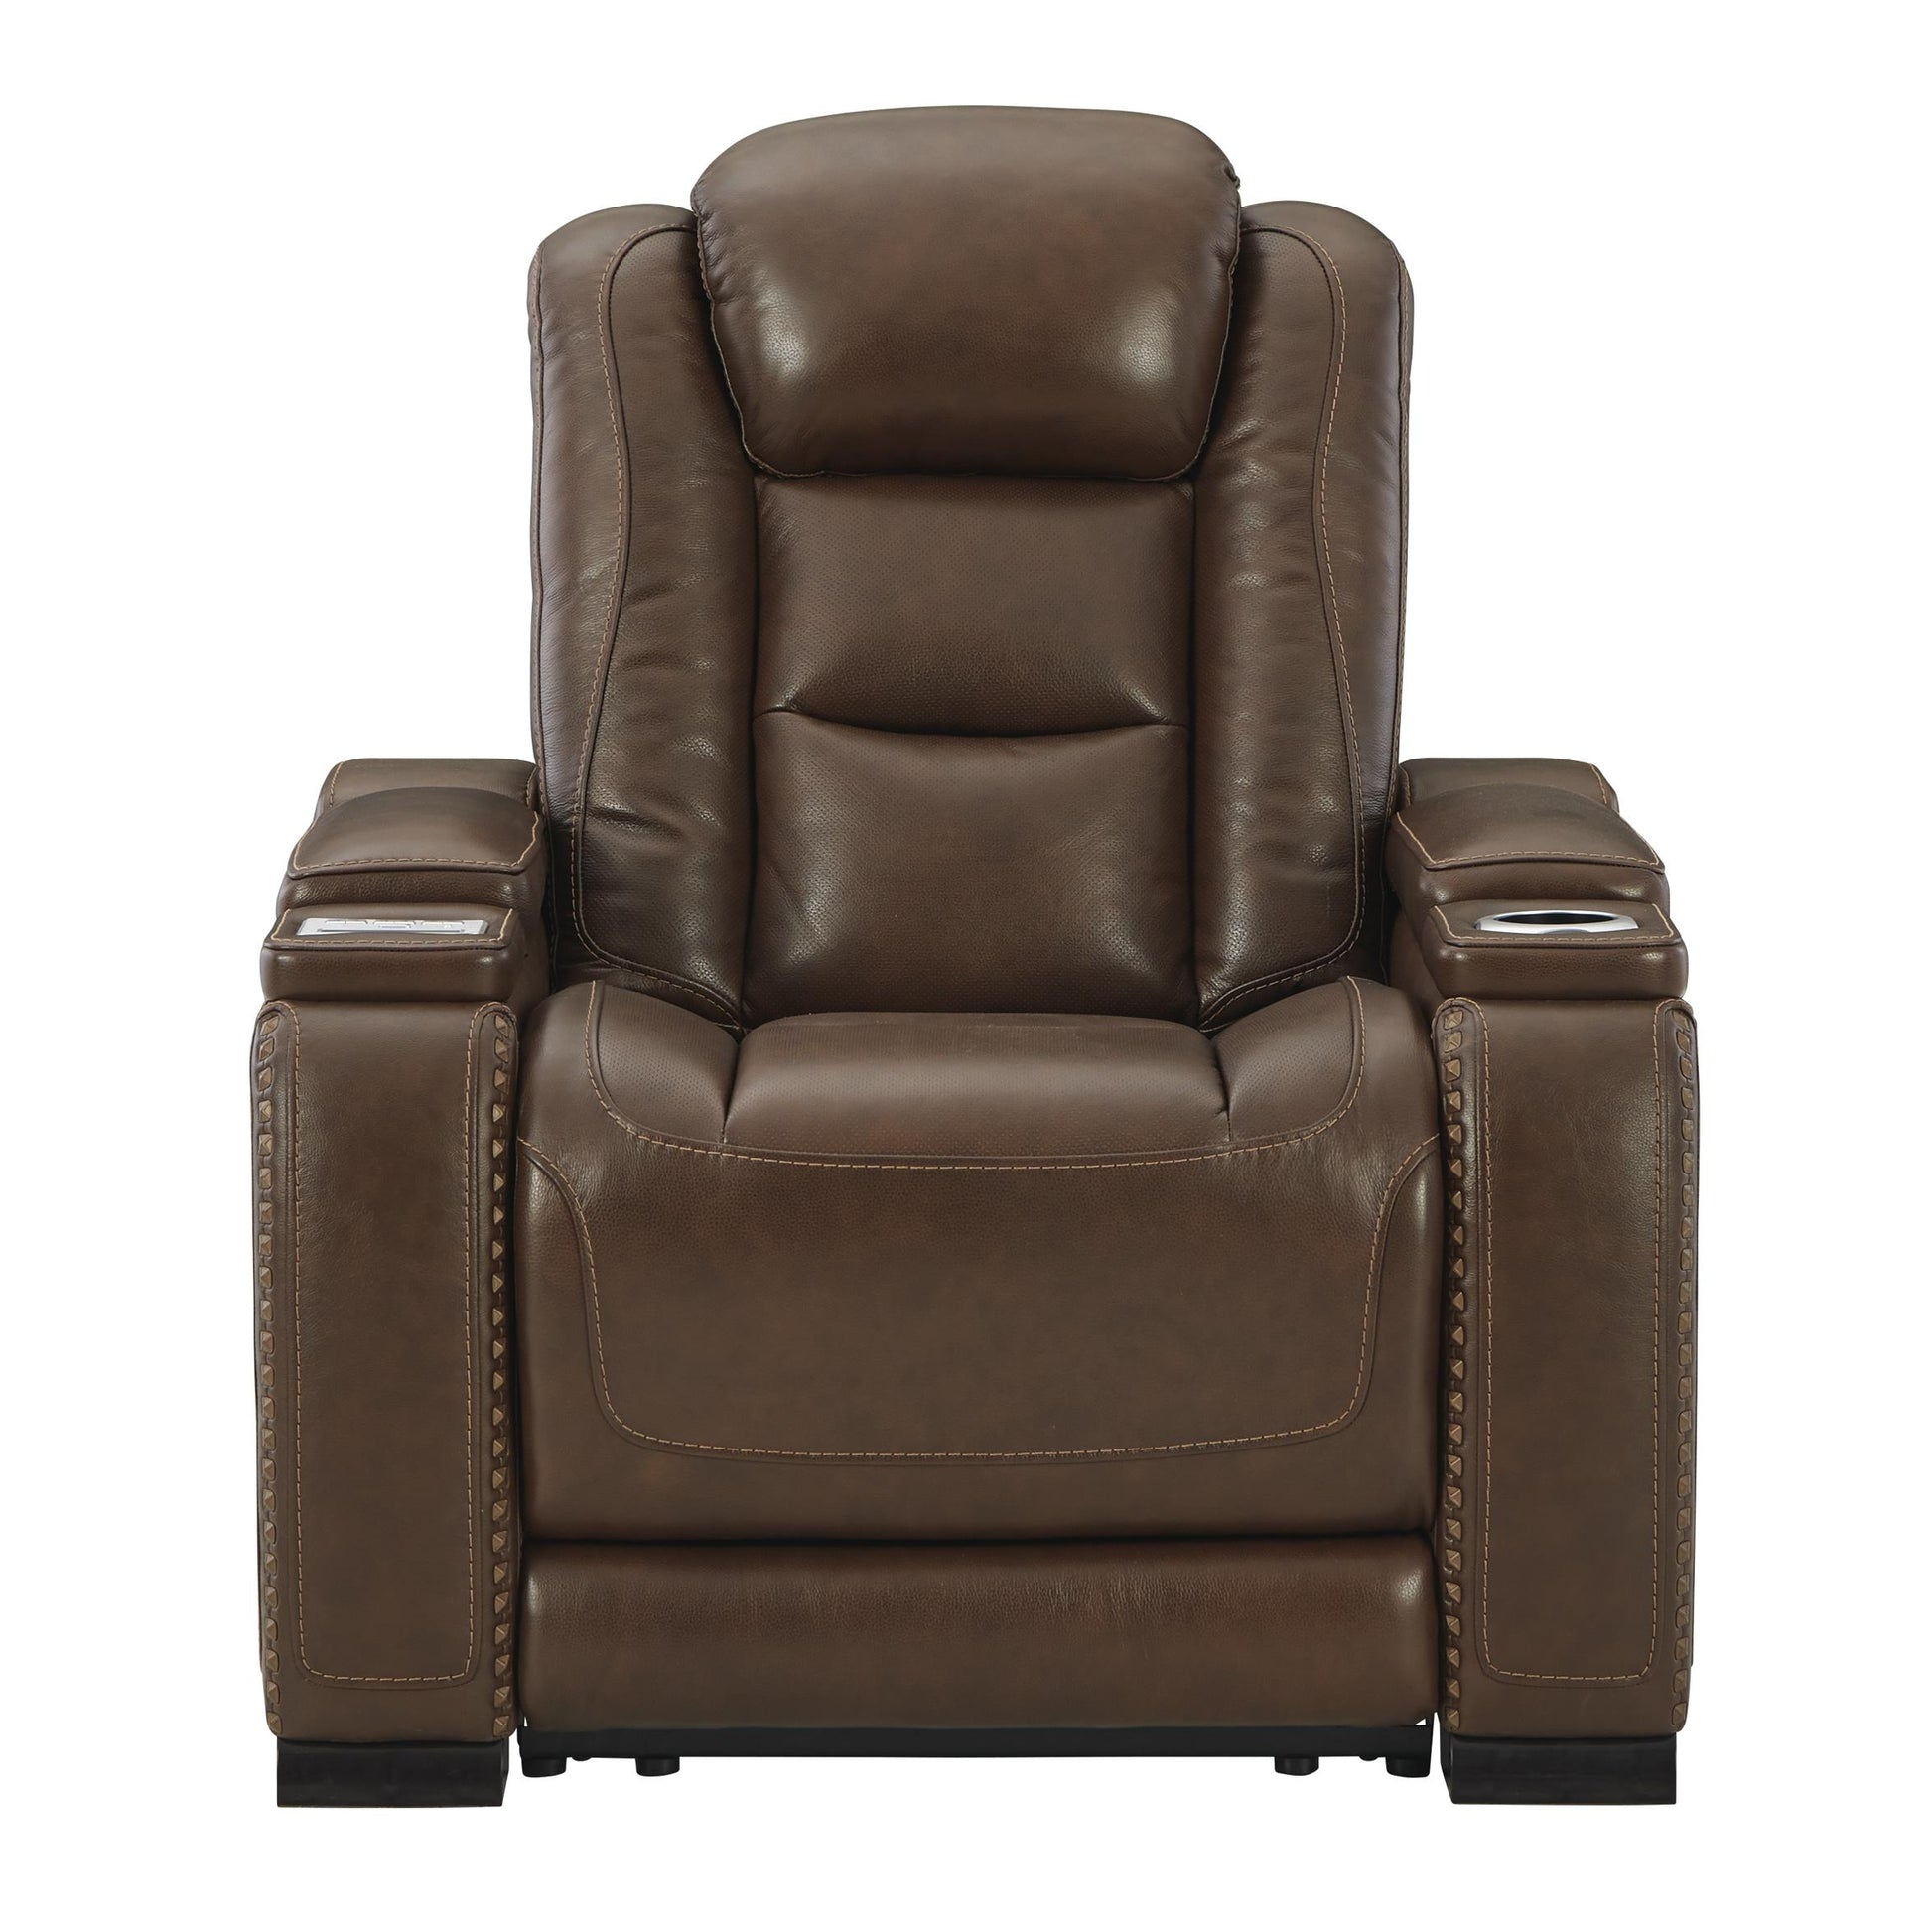 Signature Design by Ashley The Man-Den Power Leather Match Recliner U8530613 IMAGE 2